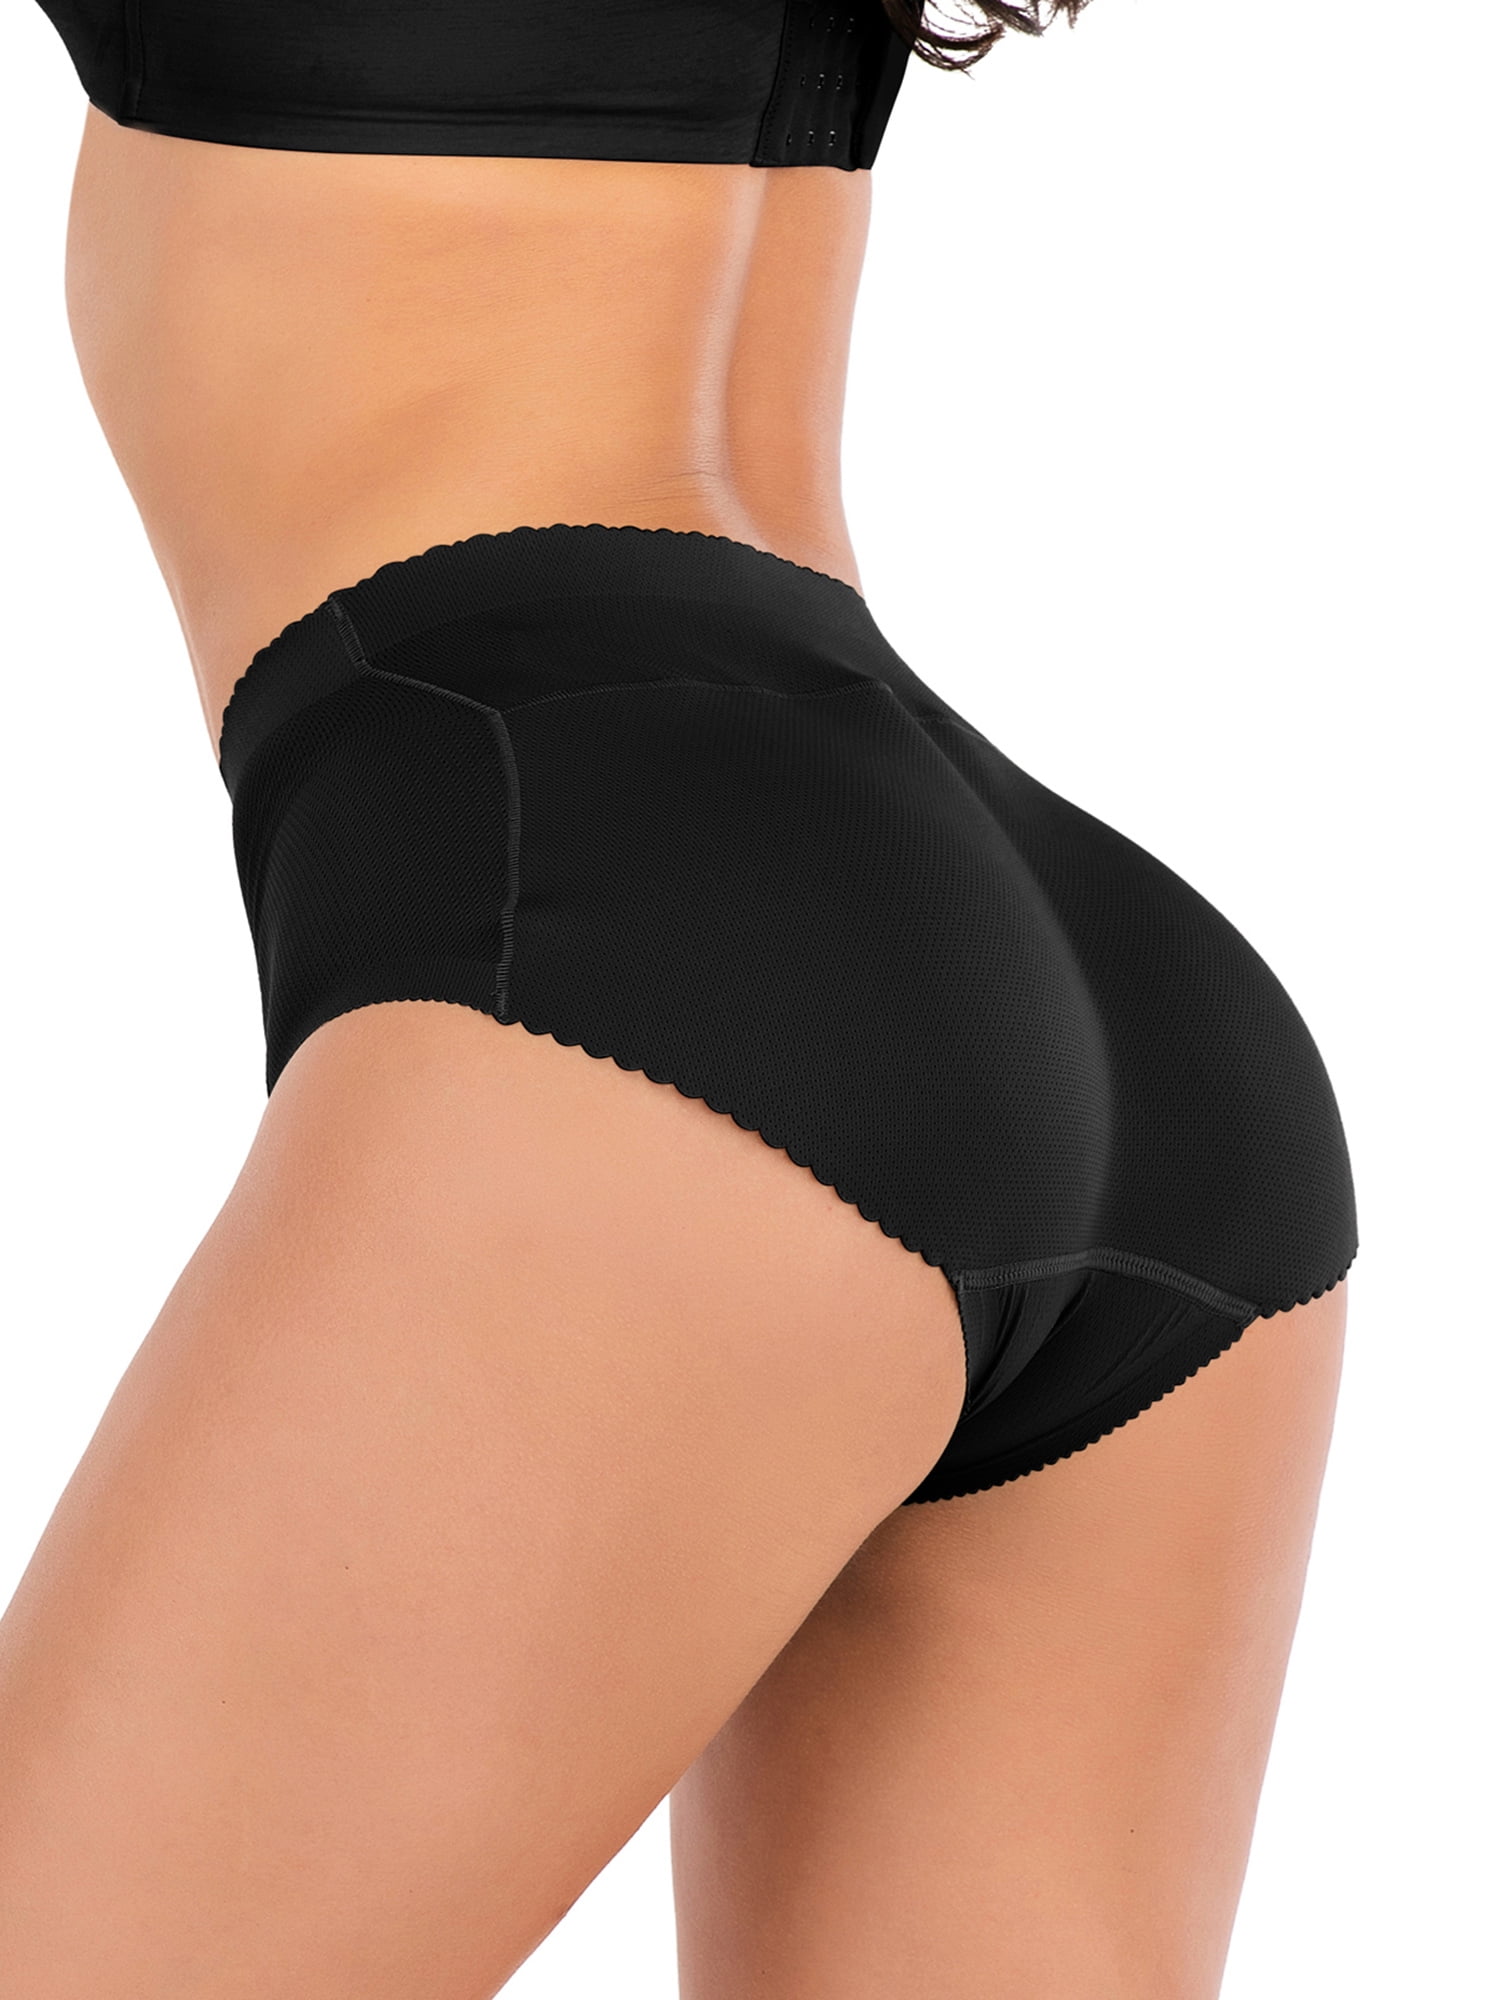 FANNYC Women Hip Enhancer Butt Lifter Panties Shapewear Seamless Shaping  Knickers Boyshorts With Removable Butt Pad Firm Control Body Shaper Panty  Underwear Briefs 